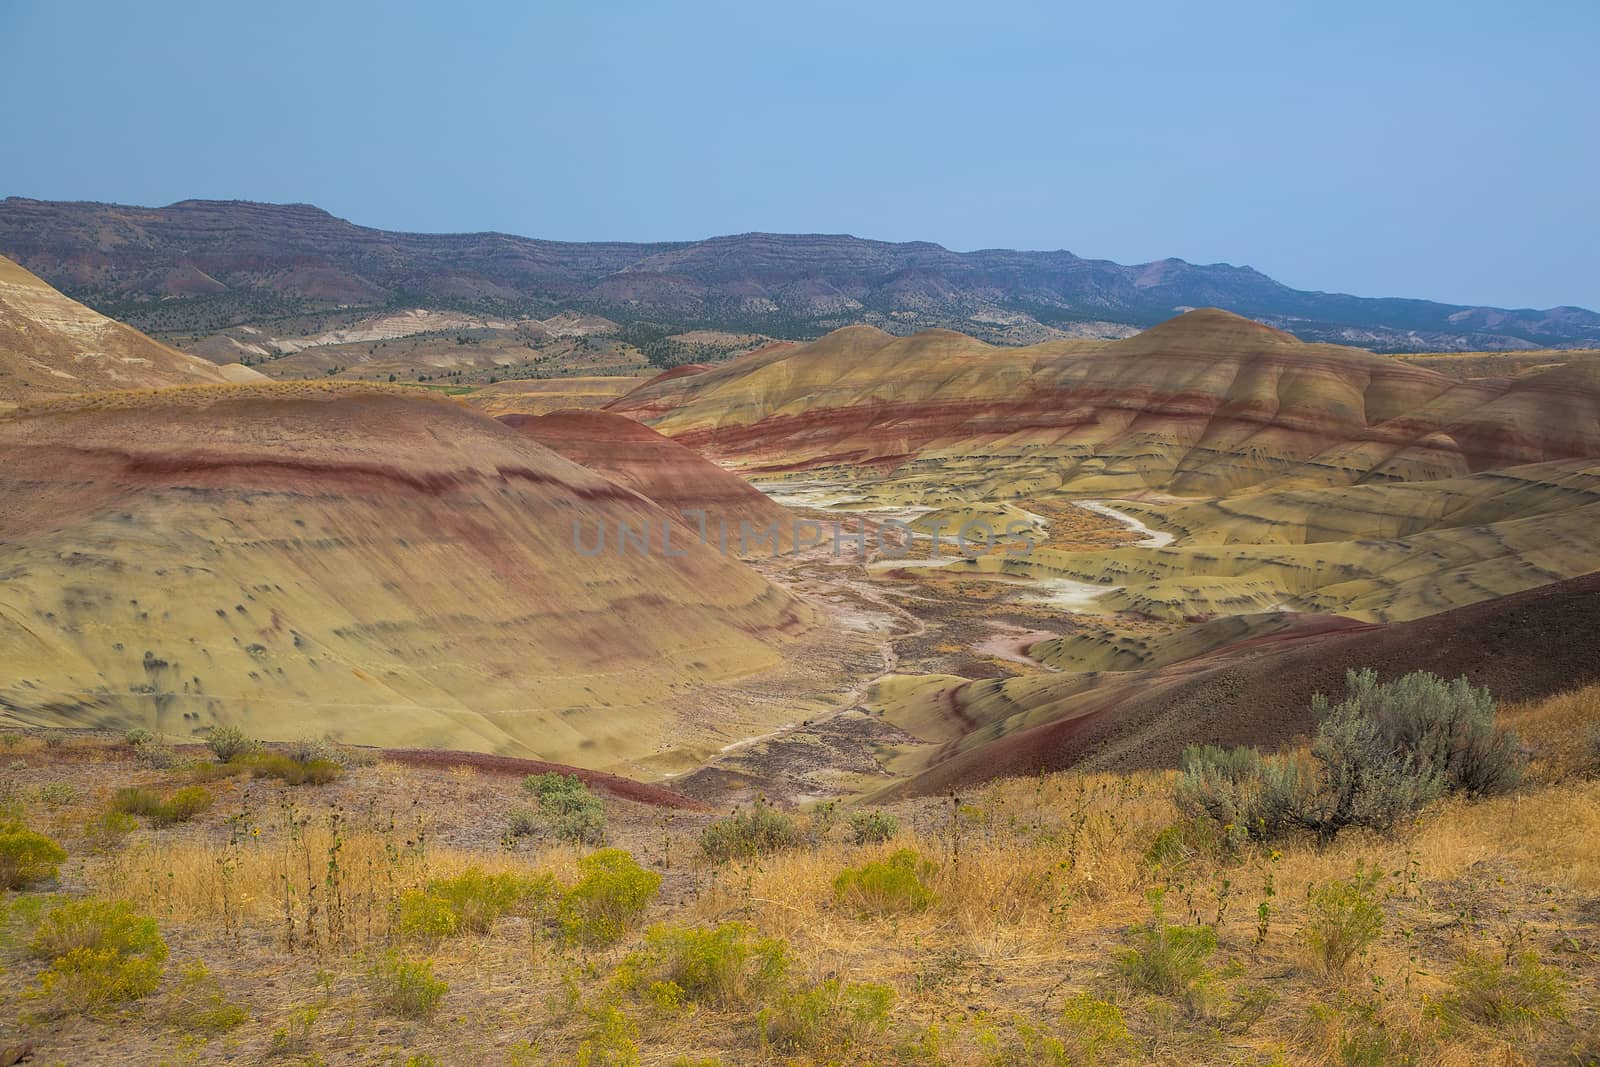 Painted Hills Landscape from Overlook by jpldesigns